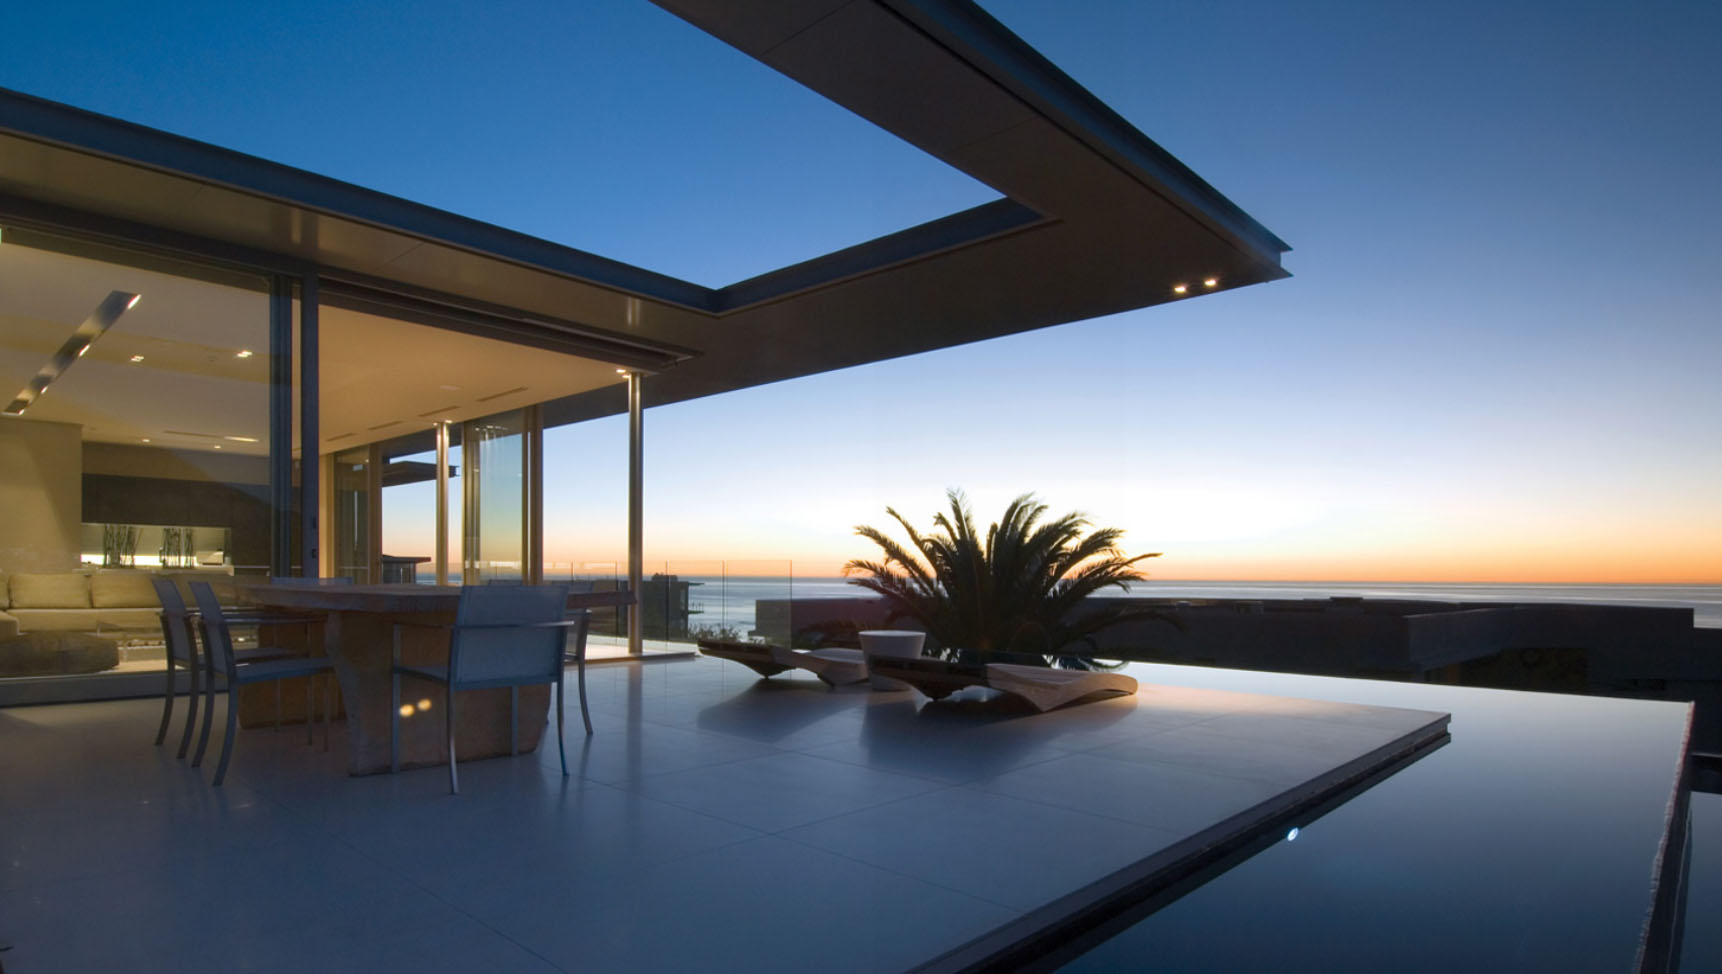 Minimalist Ocean View Home In South Africa Idesignarch